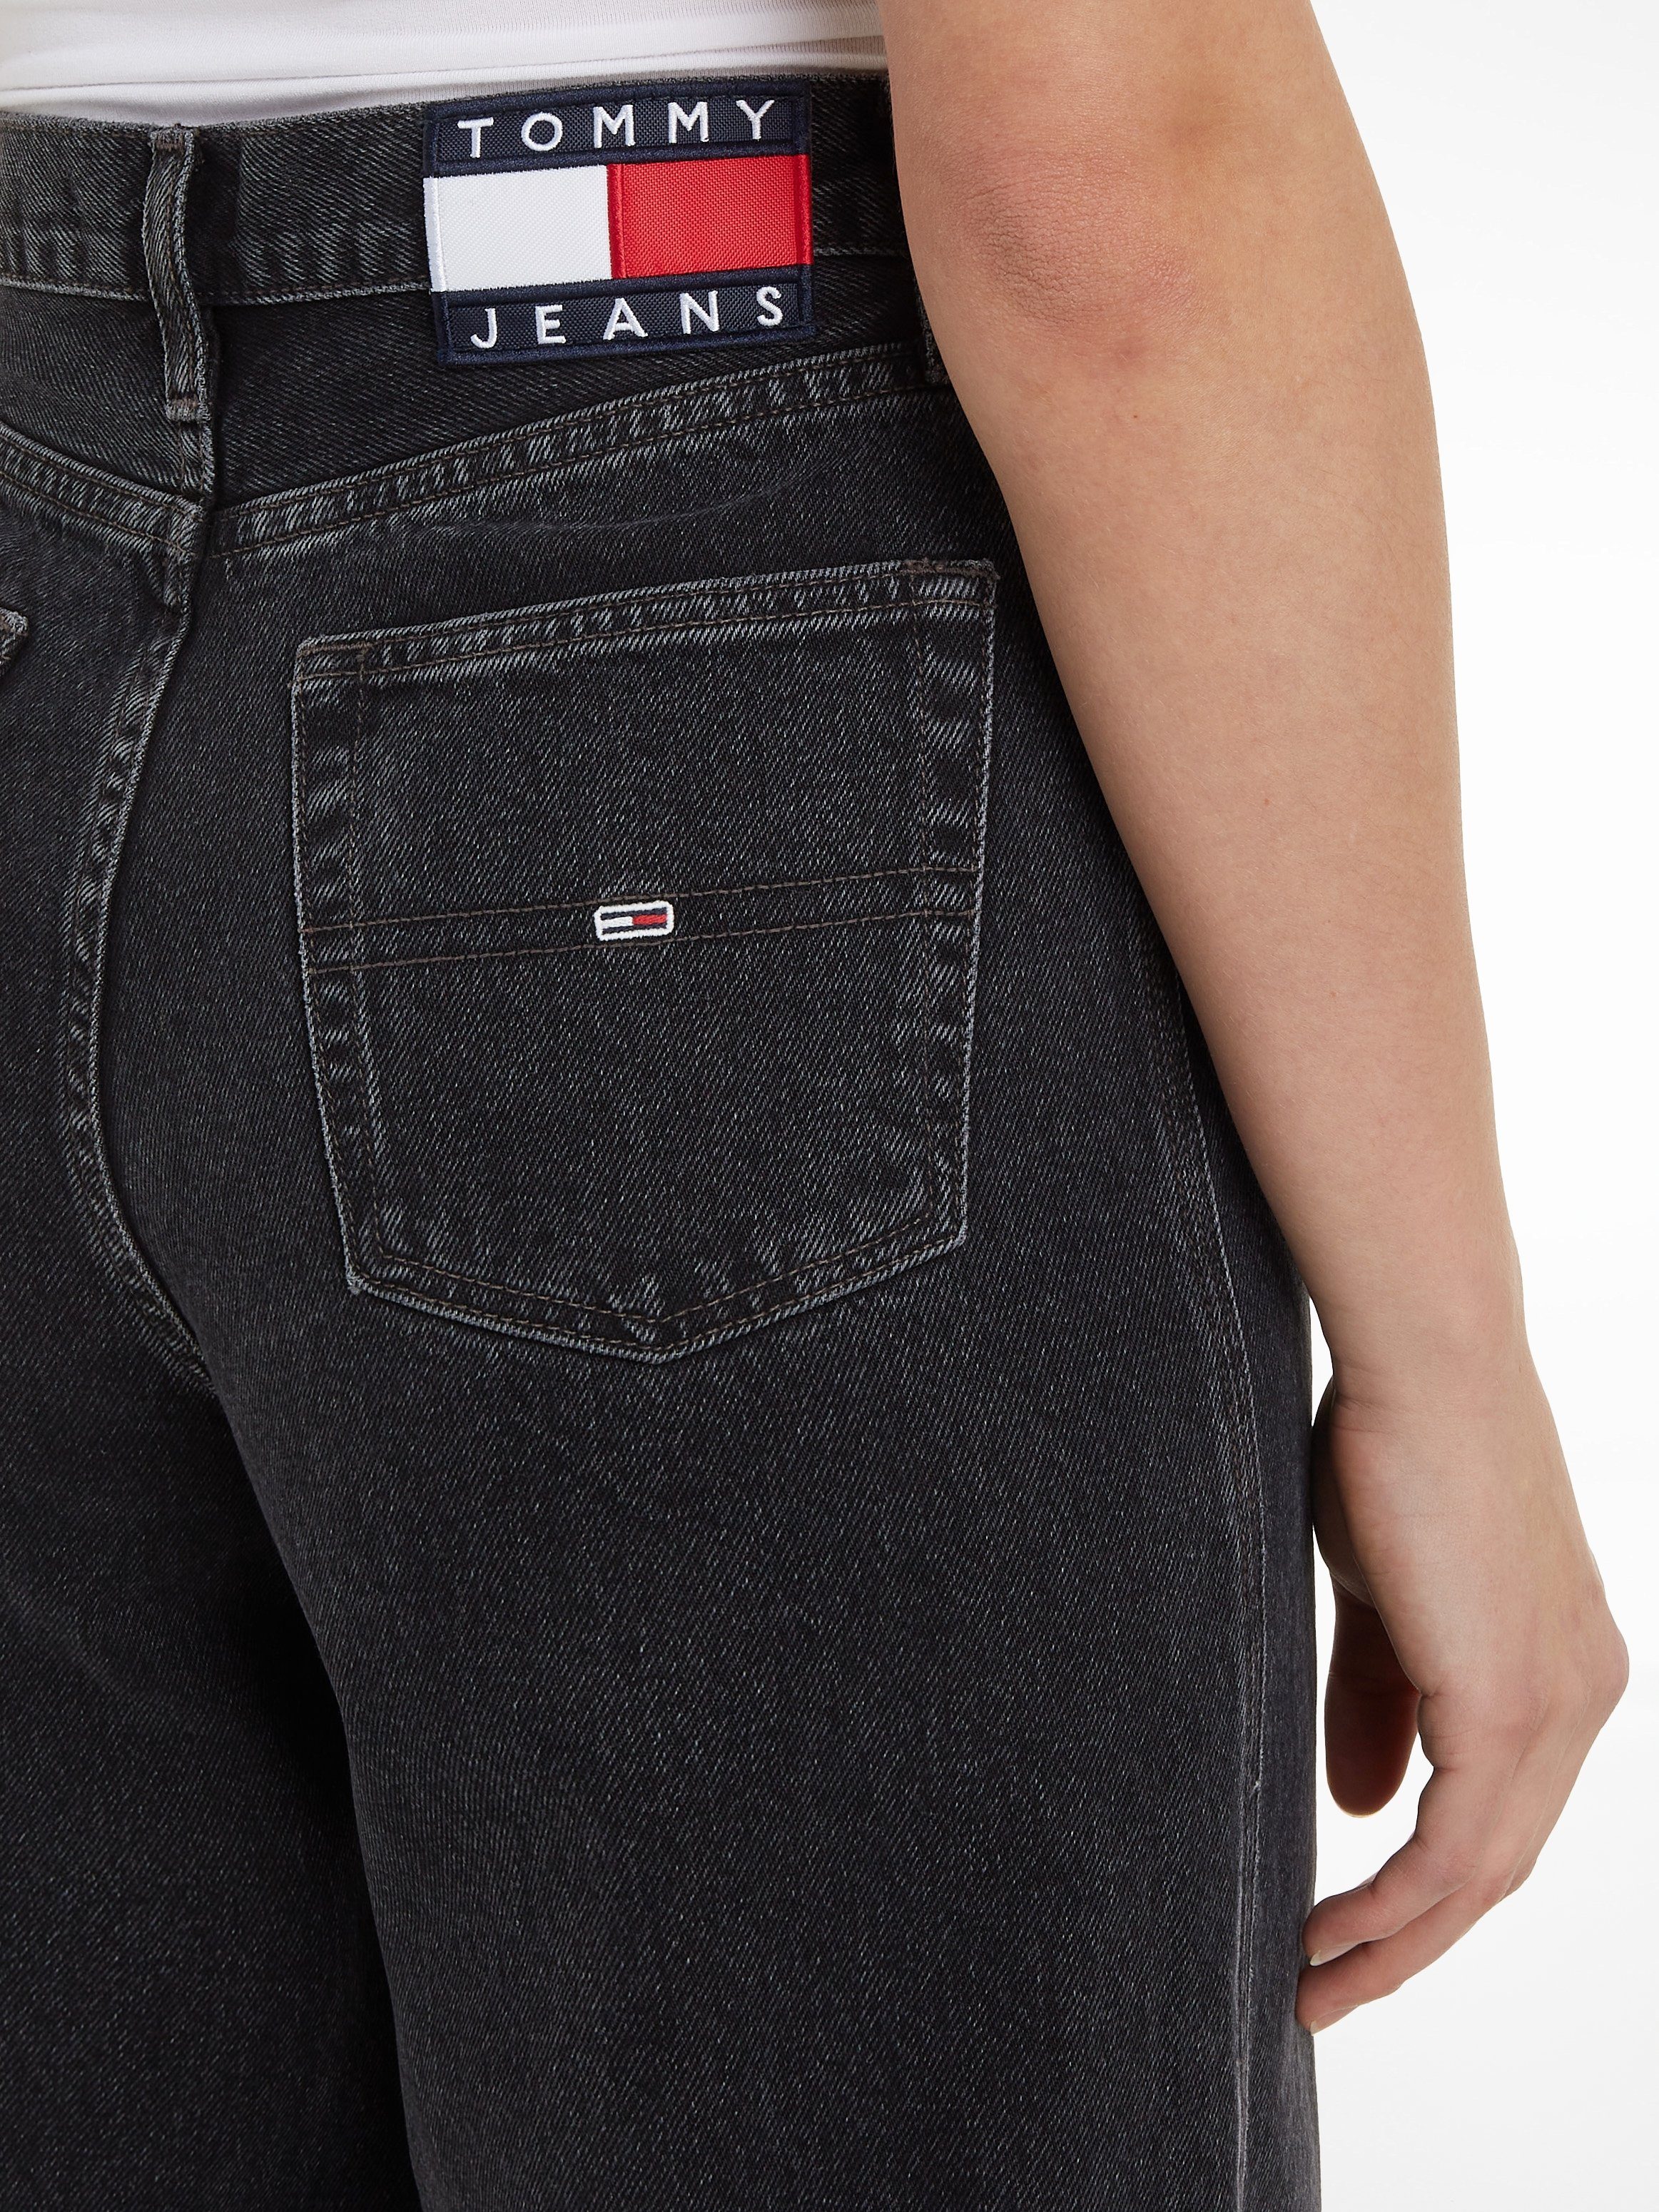 Tommy Jeans Logobadges Jeans black Weite Jeans mit Tommy